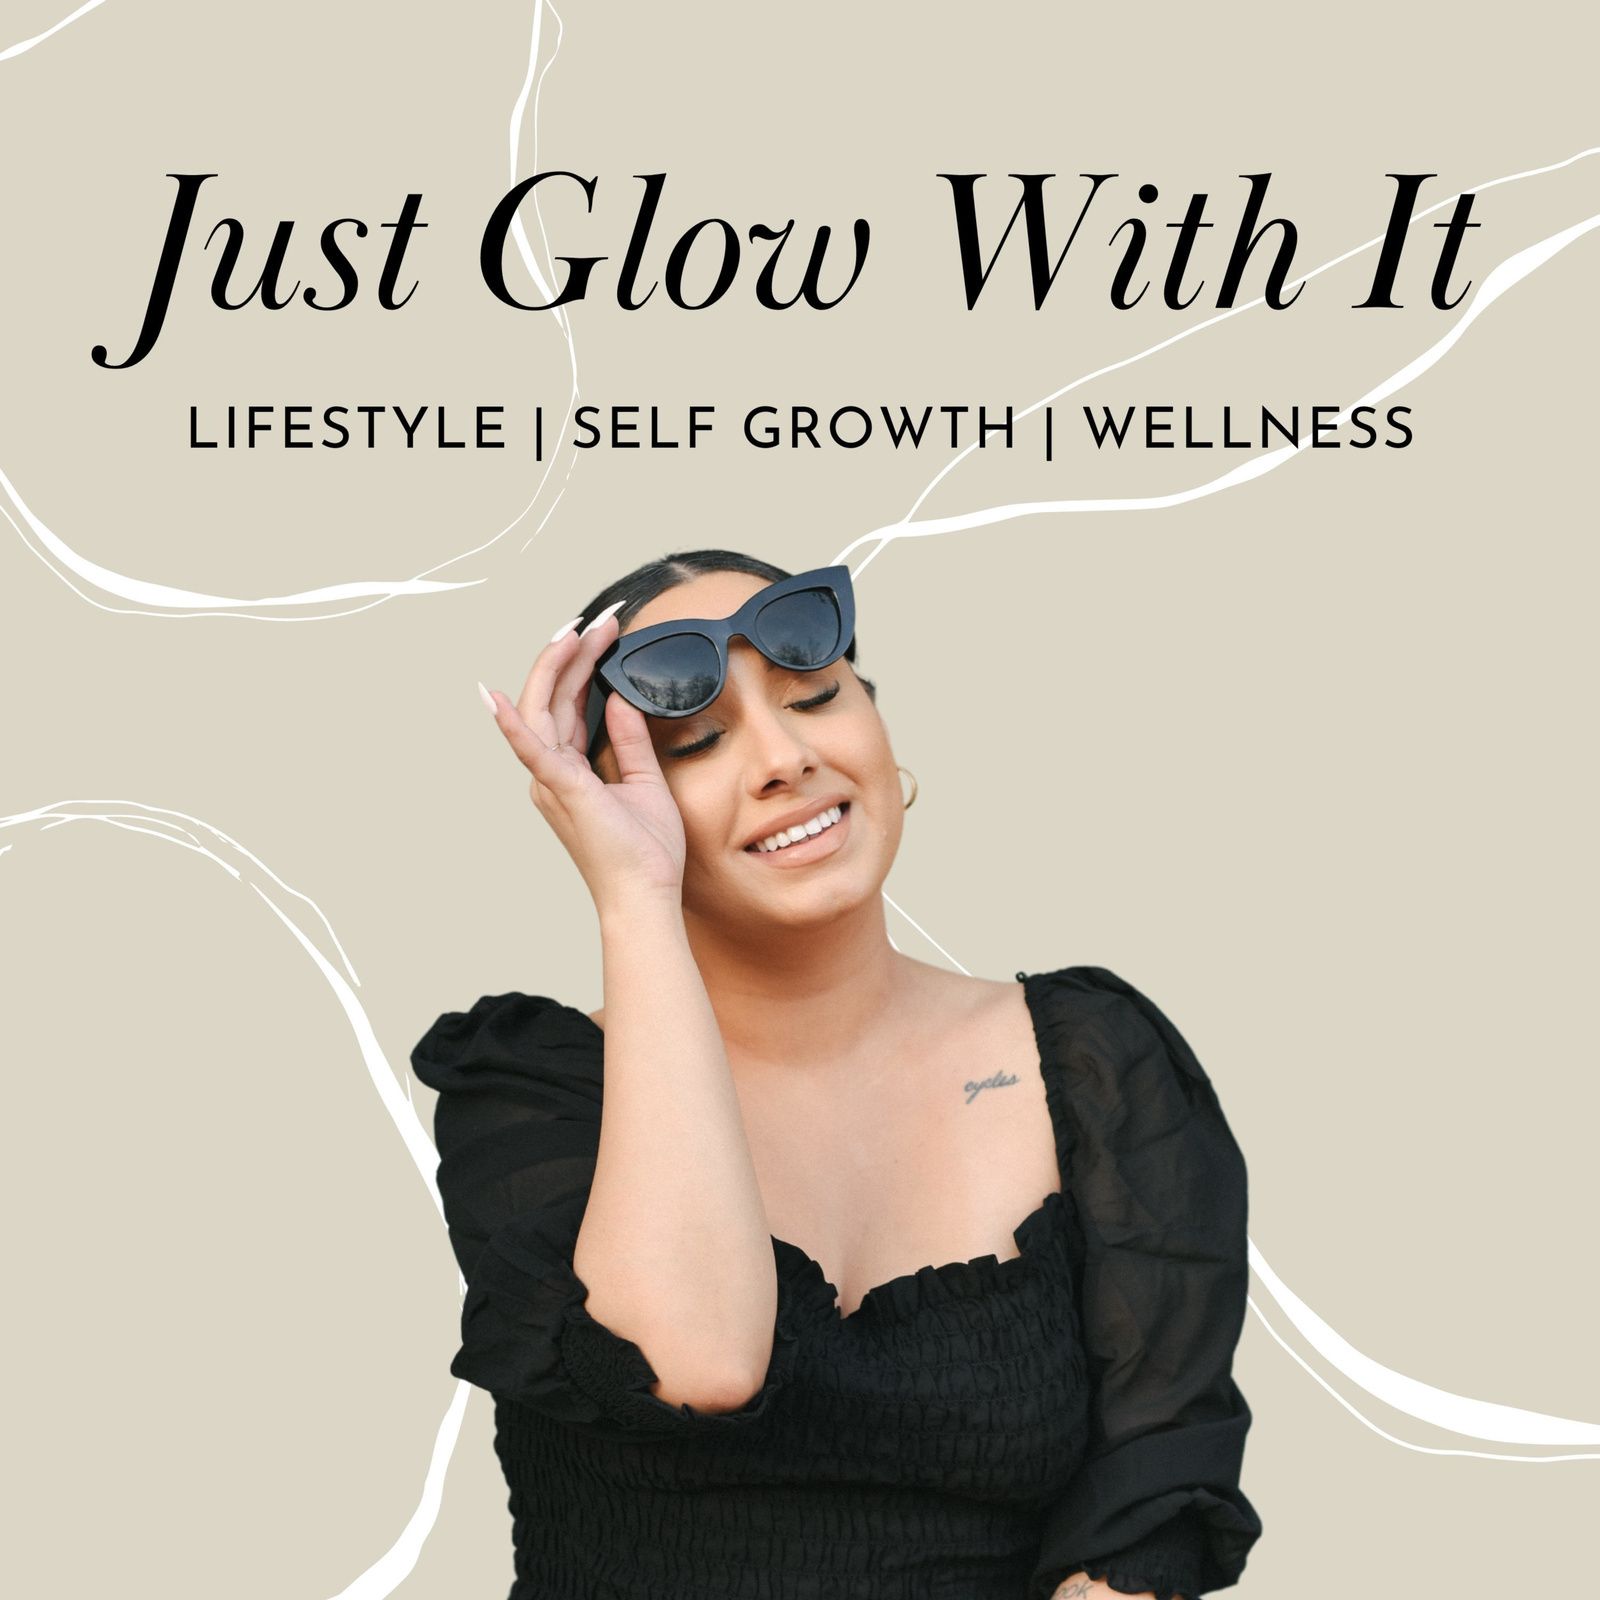 Just Glow With It:Just Glow With It